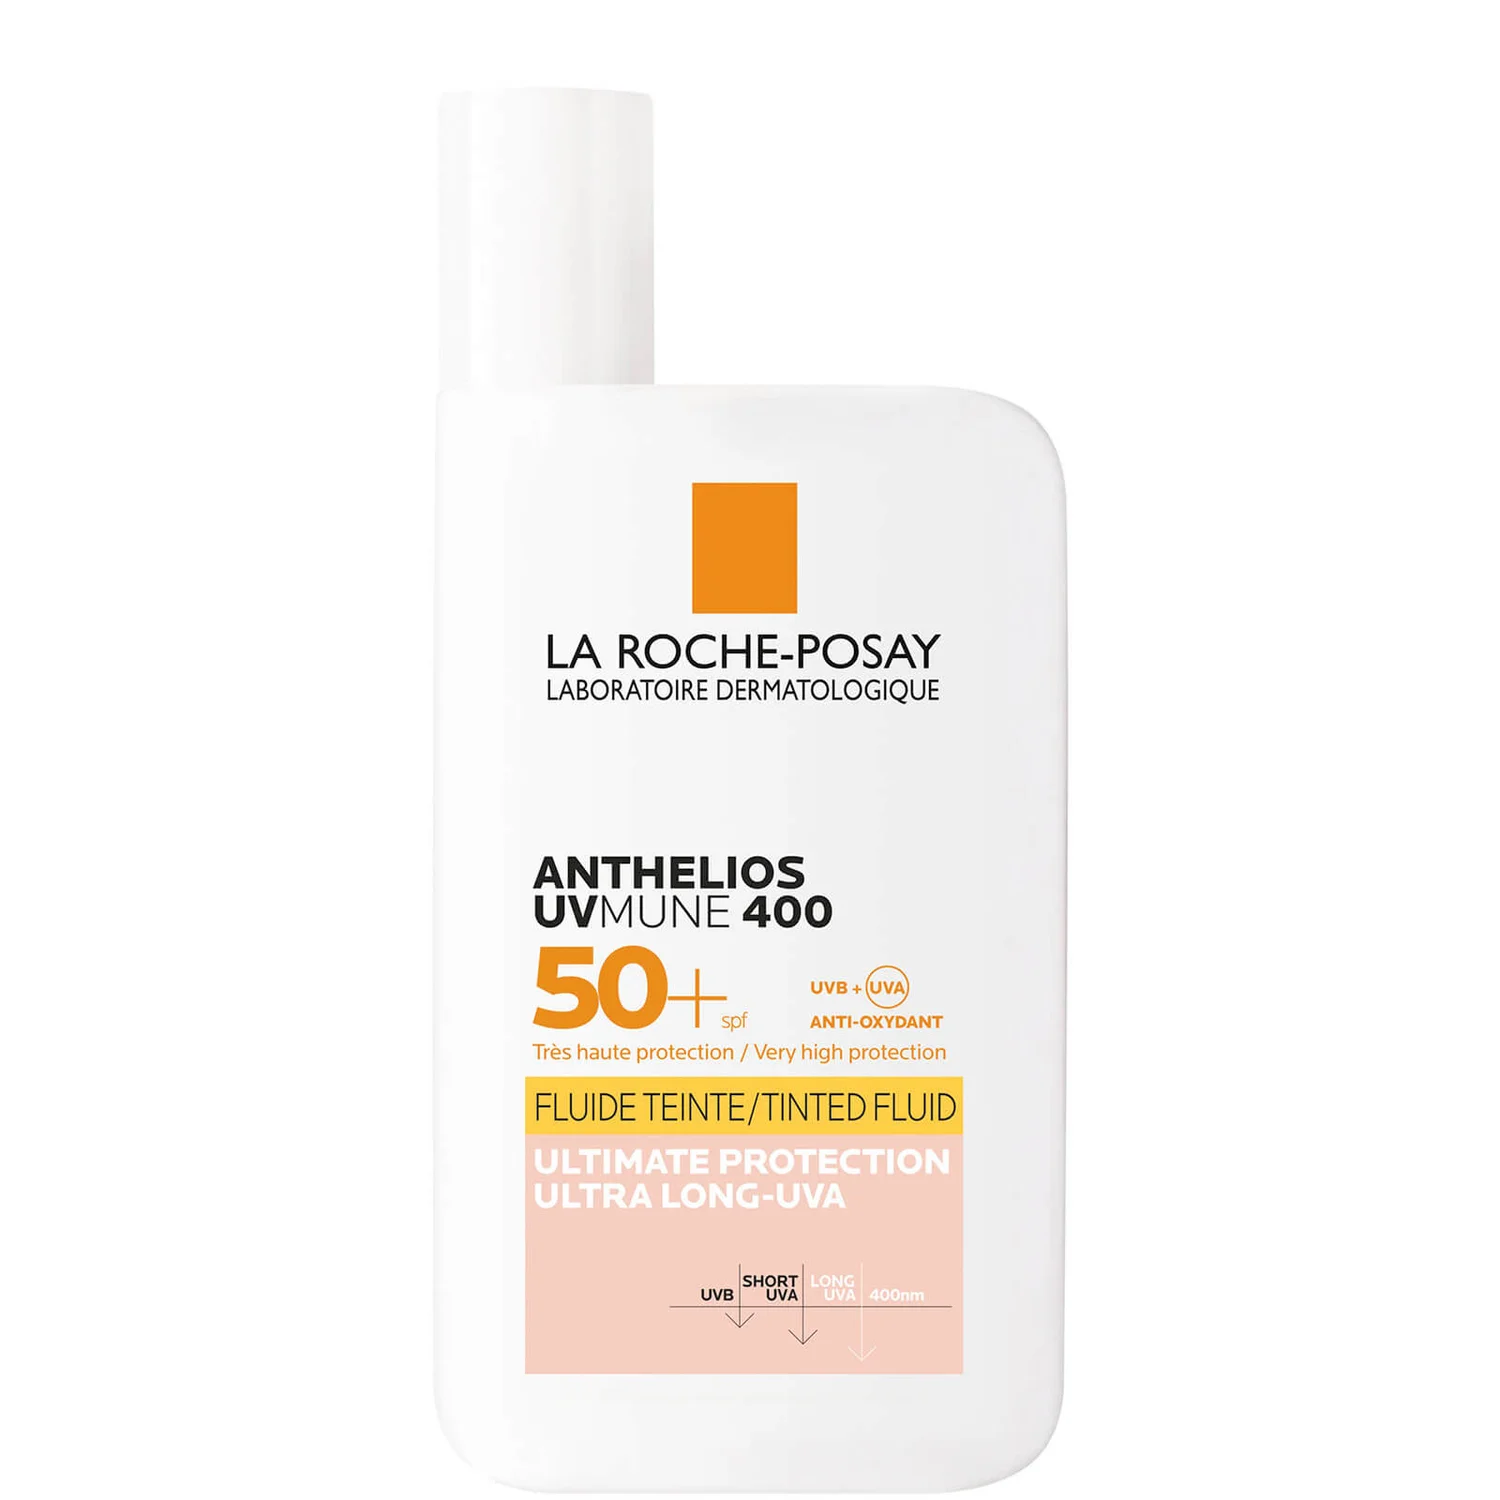 La Roche-Posay Anthelios UVMune 400 Invisible Fluid Tinted SPF50+